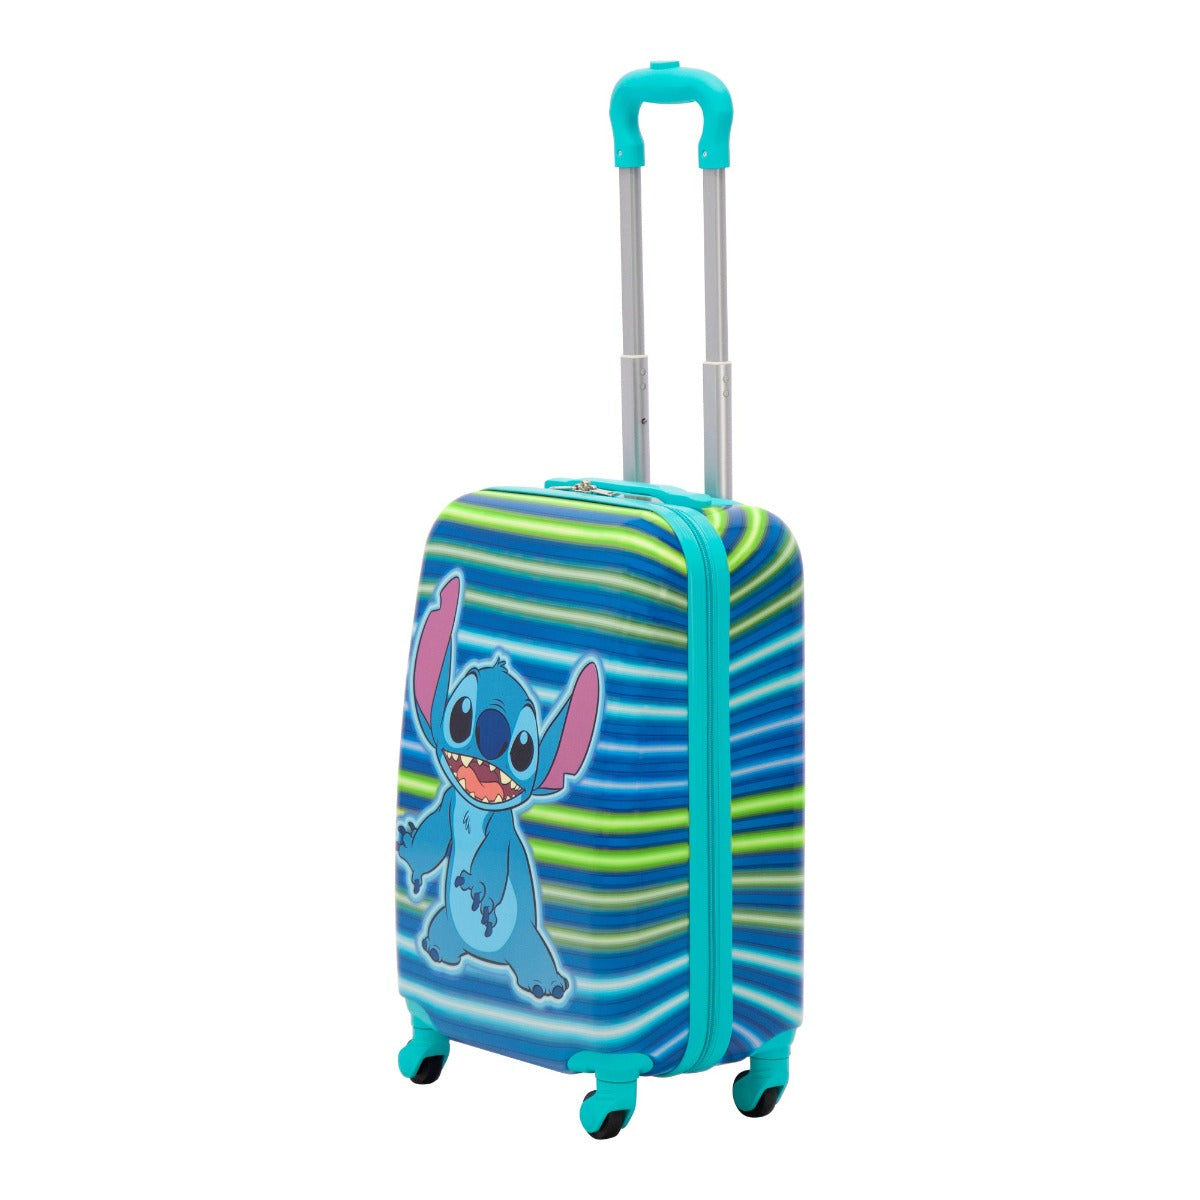 Disney Ful Stitch Neon Stripe Hardside Spinner Suitcase - Blue 21" Best Carry On Luggage for Kids